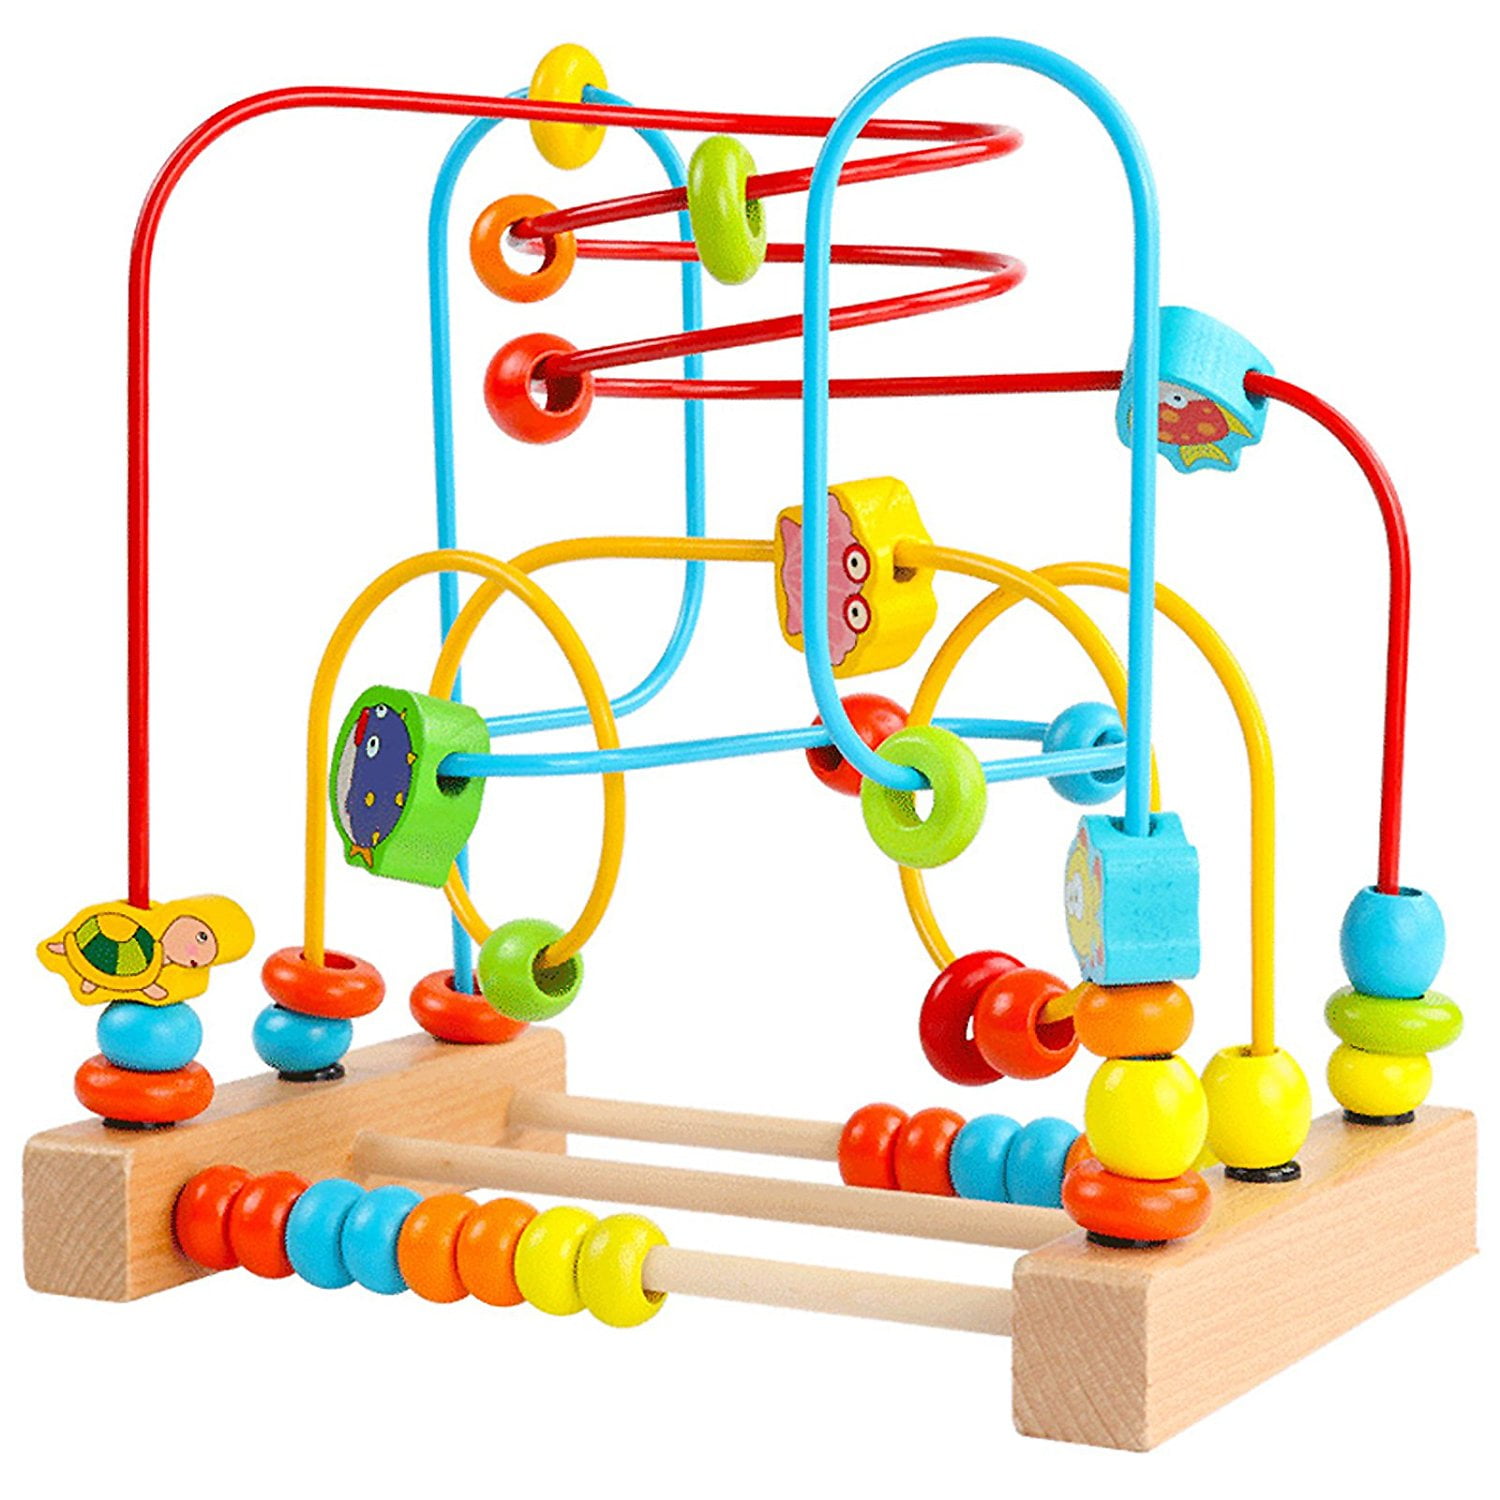 Wooden Large Around Circle Beads Maze Pull Along Cart Baby Toy Play Activity